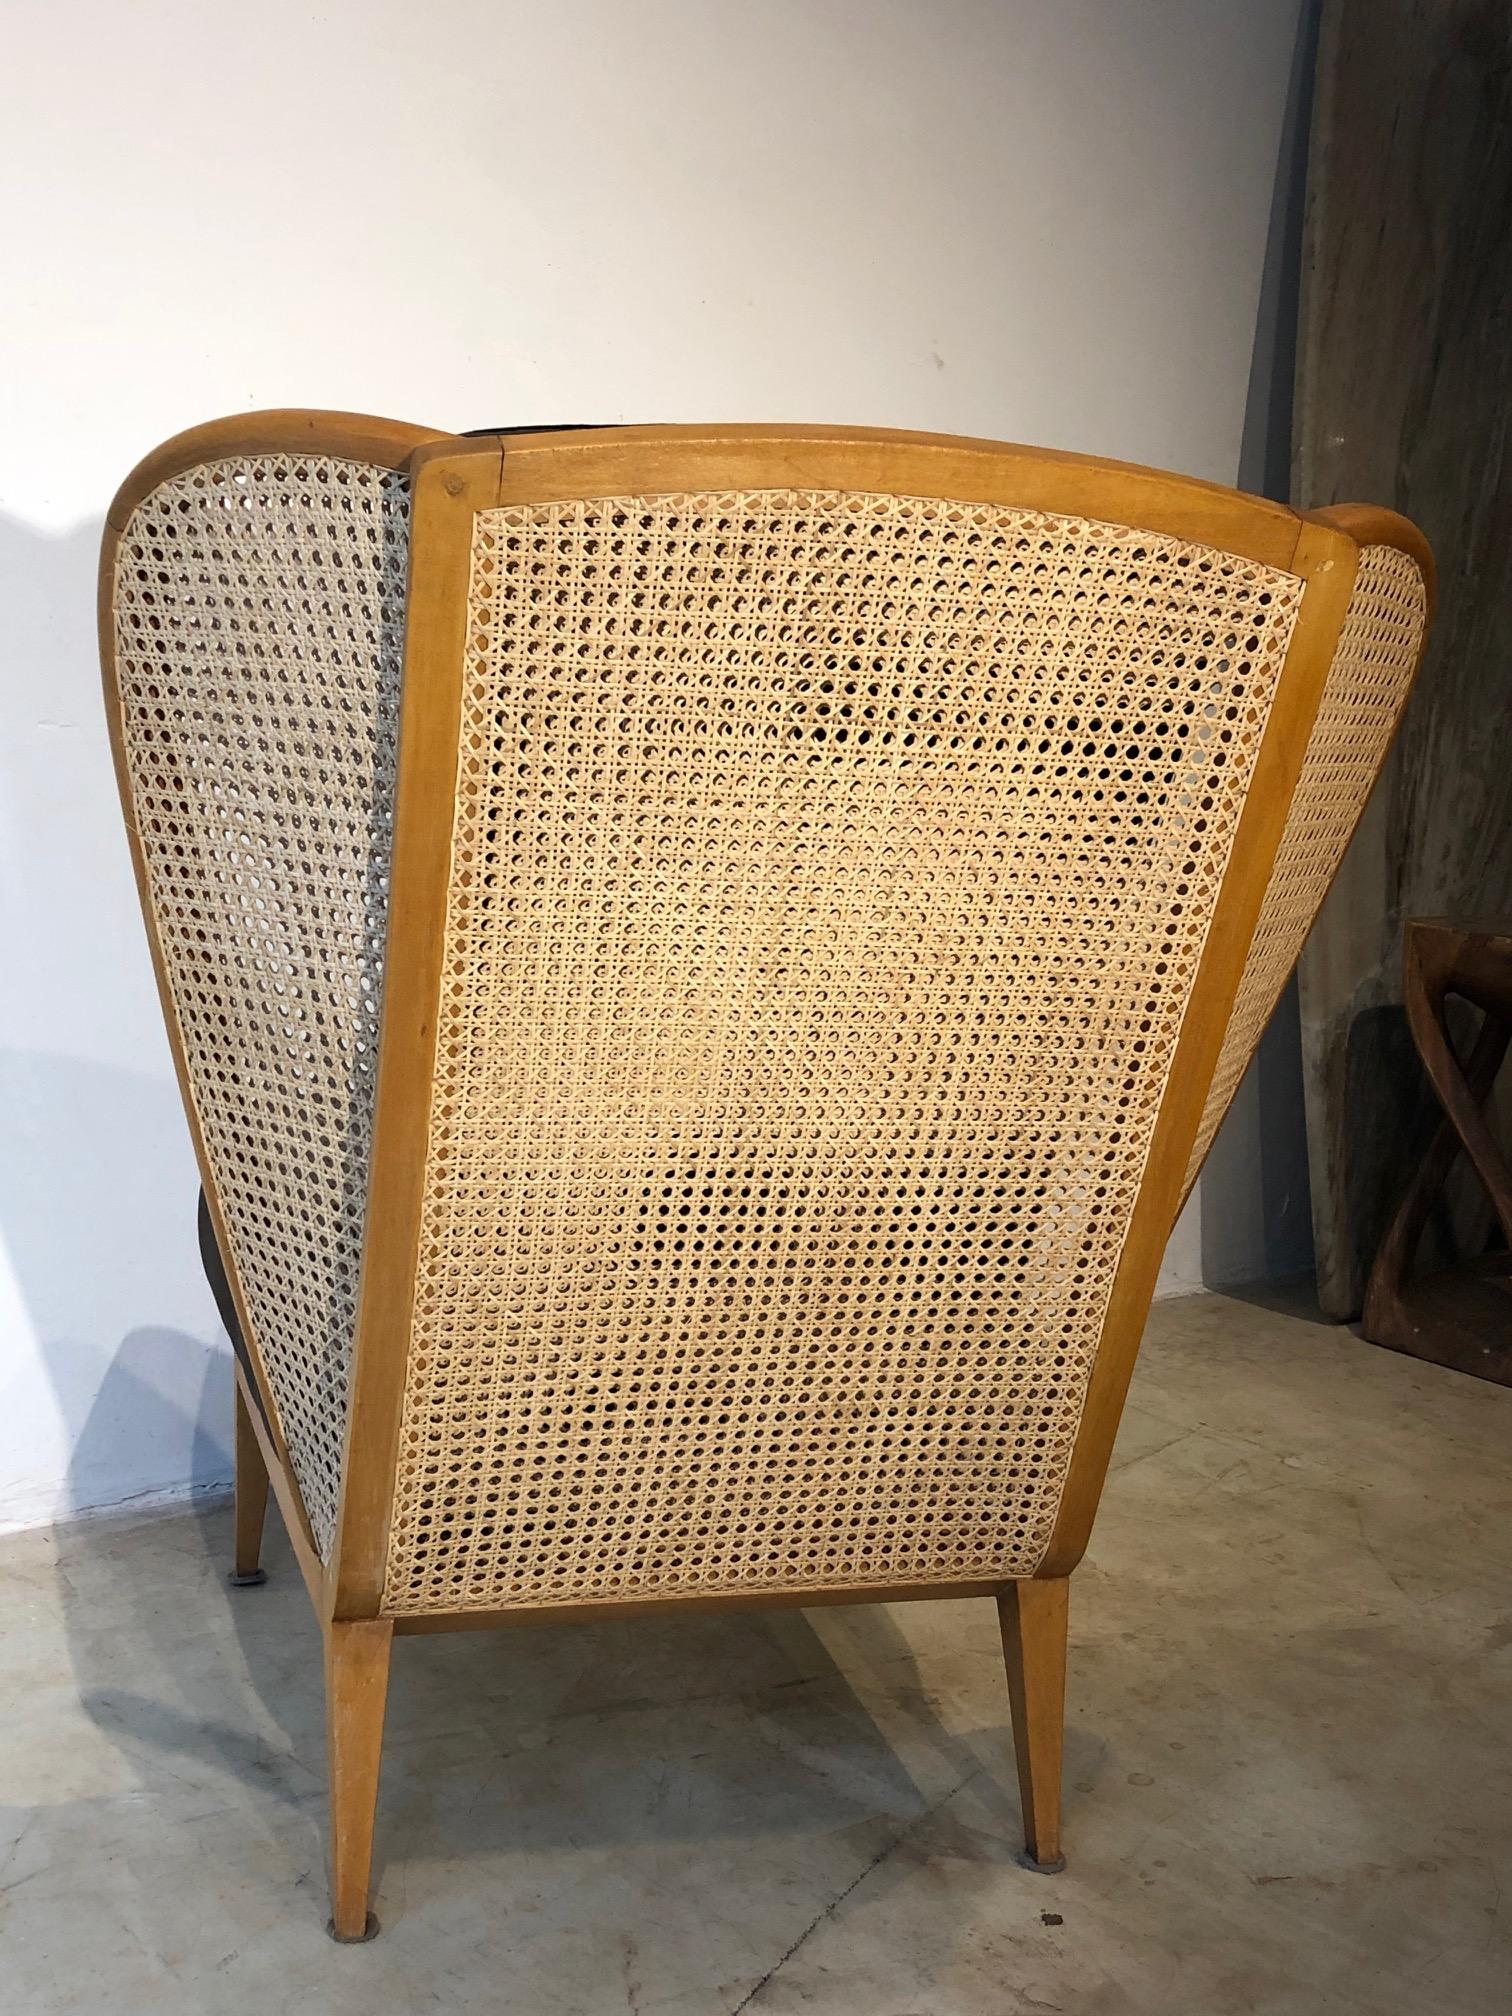 Giuseppe Scapinelli 'Attributed', Pair of chairs with Straw Backrest 2